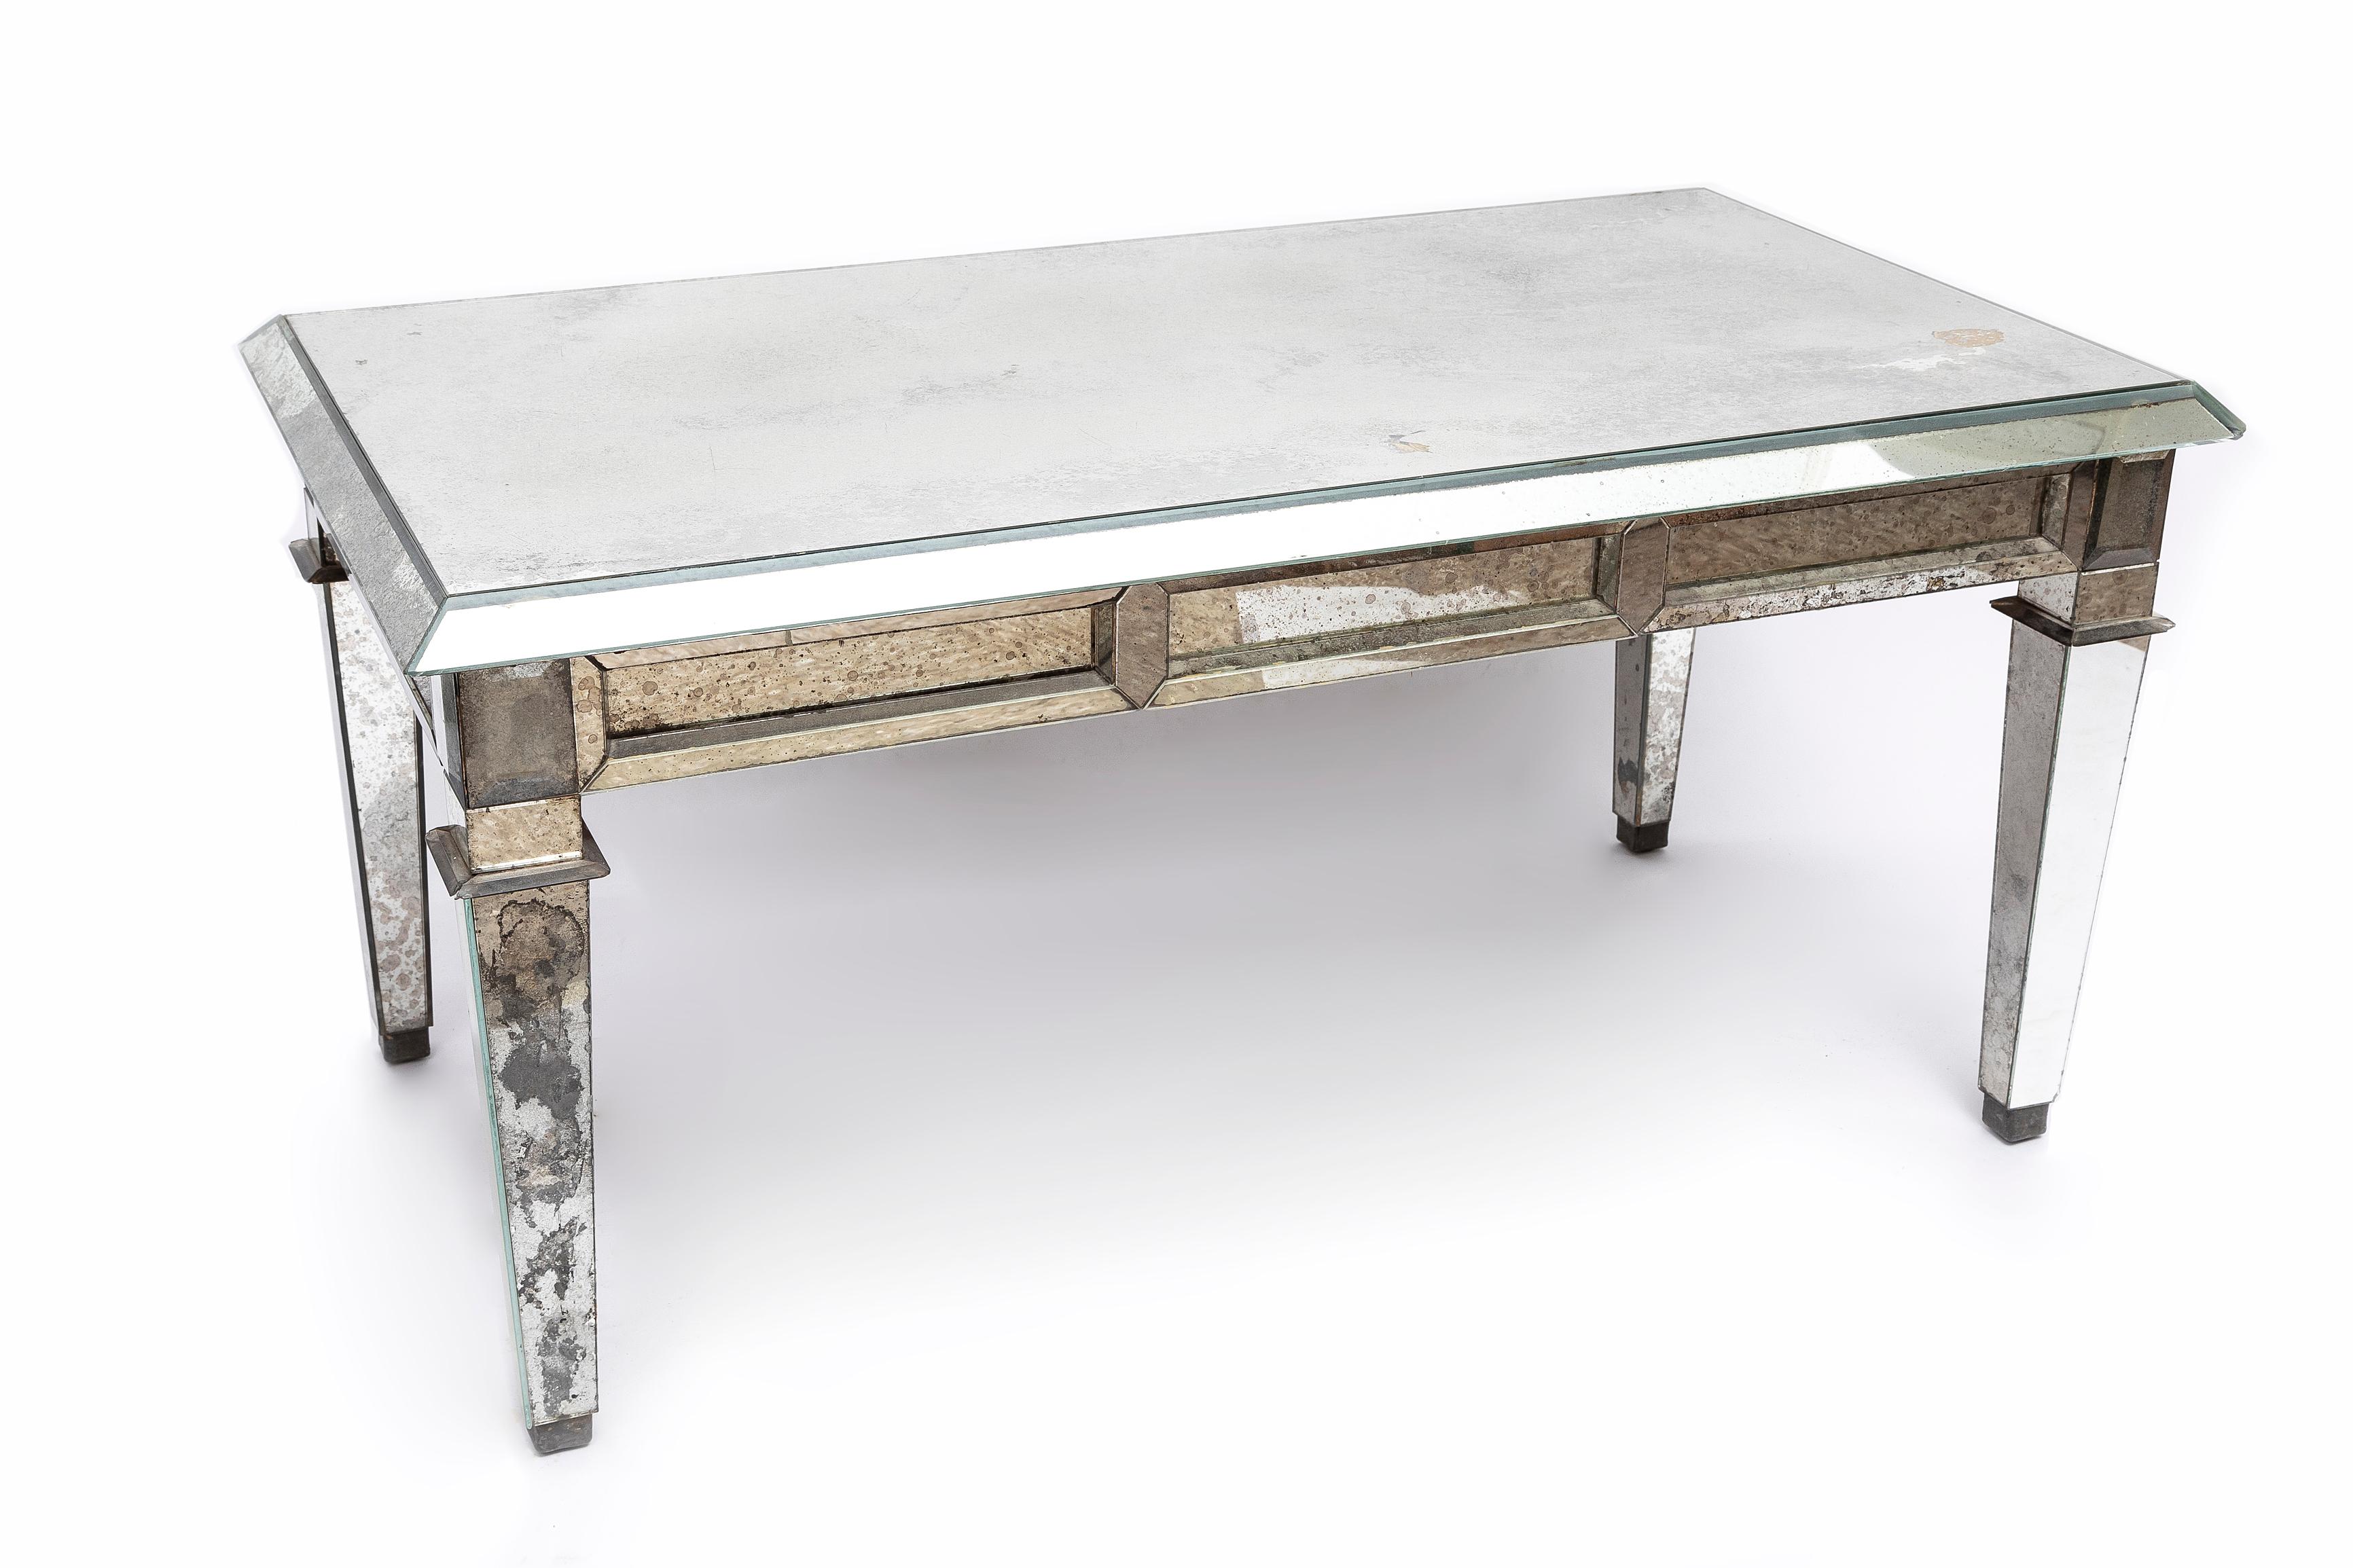 A Fantastic French Mid Century Mirrored Coffee Table by Jansen. All- faceted, inset mirrored top, skirts and legs, this mirrored coffee table is a prominent interior design masterpiece and is exceptionally rare.  Mirrored coffee tables were